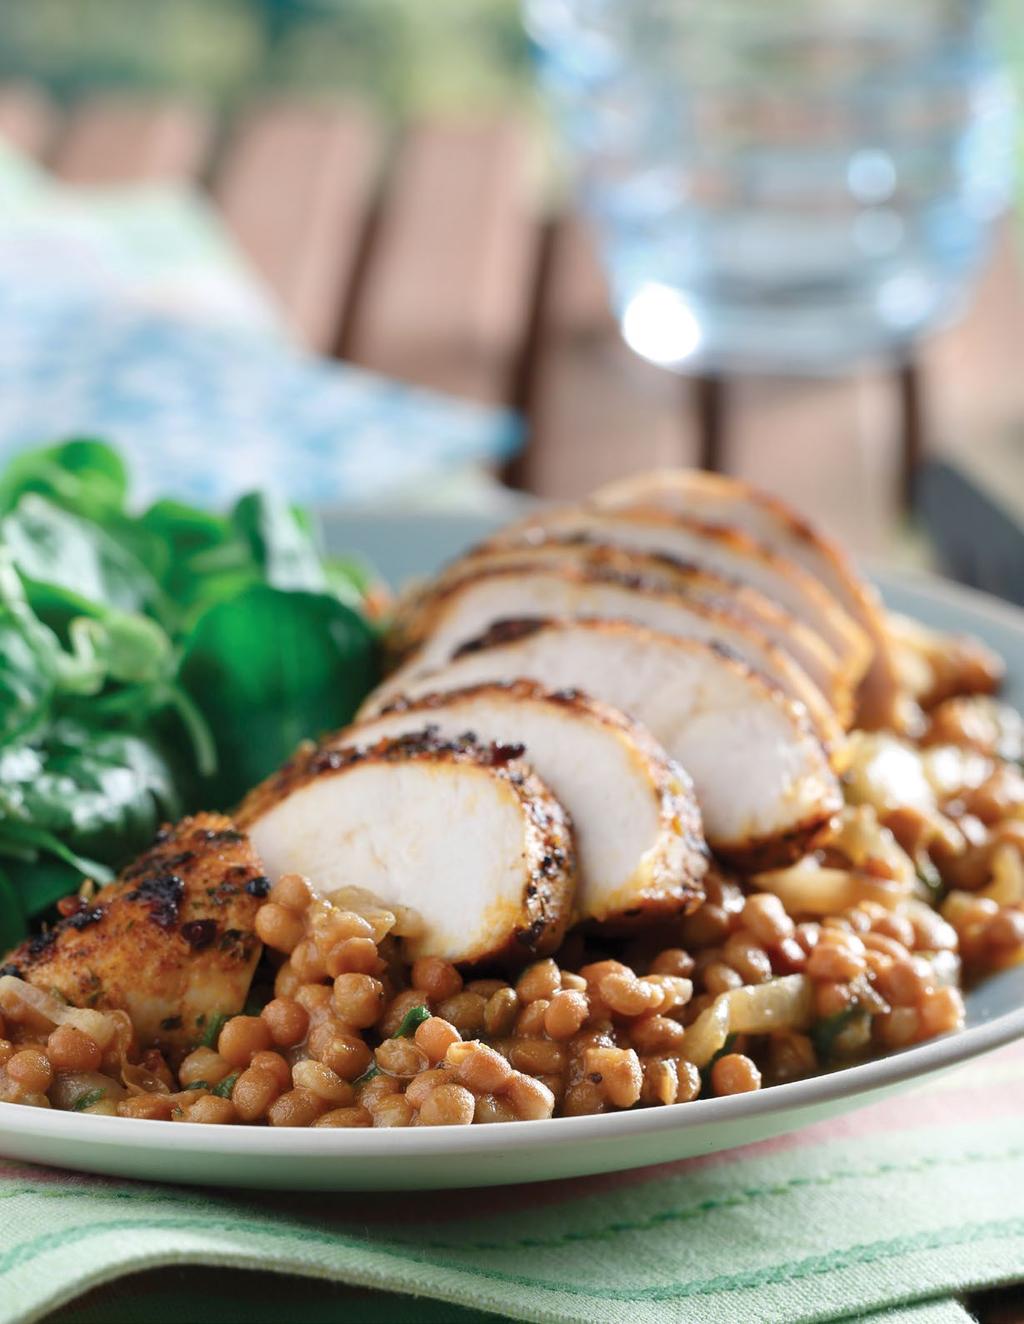 Main Course Blackened Chicken & Creole Lentils SERVINGS 8 PREP TIME 10 minutes TOTAL TIME 35 minutes 8 skinless chicken breasts or thighs ¼ cup (60 ml) Cajun spice blend (or use recipe below) 2 Tbsp